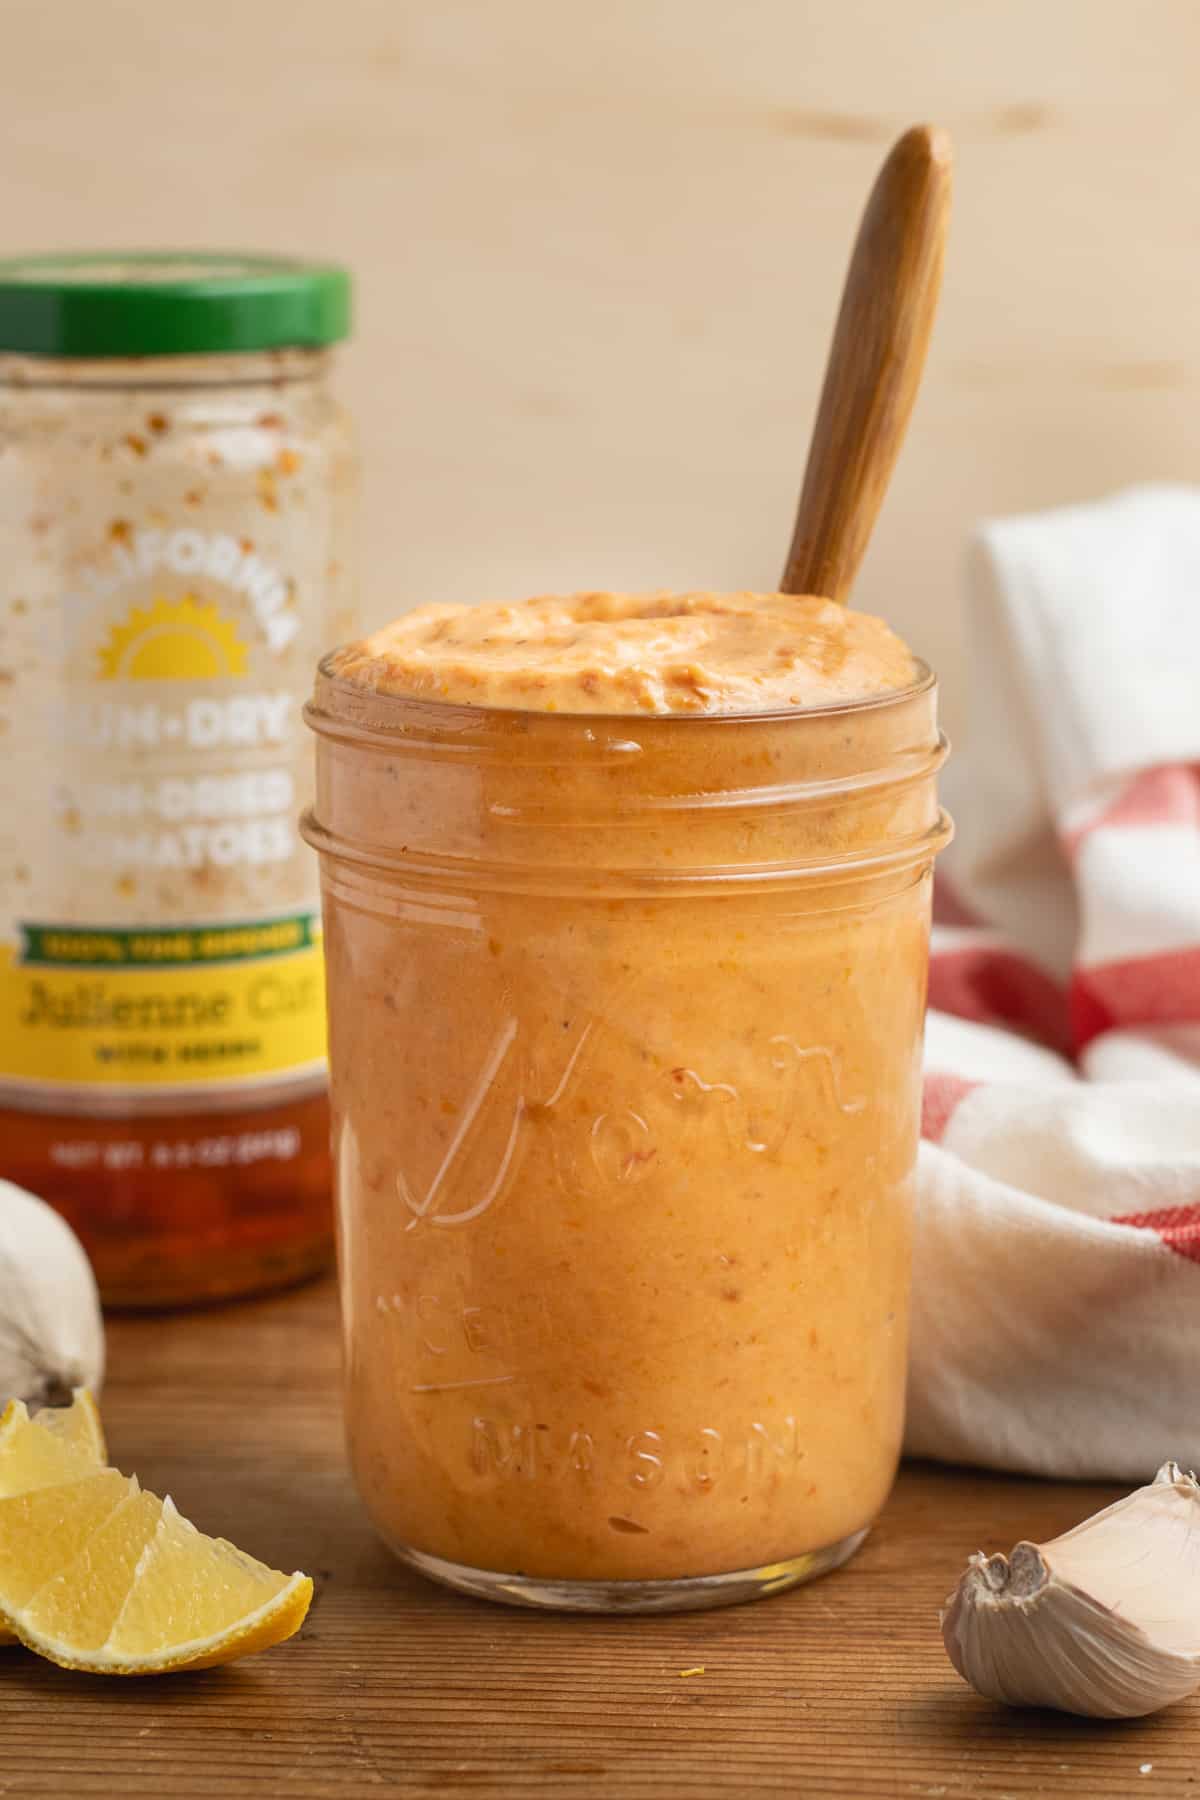 This is a picture of a jar with the sun-dried tomato aioli.